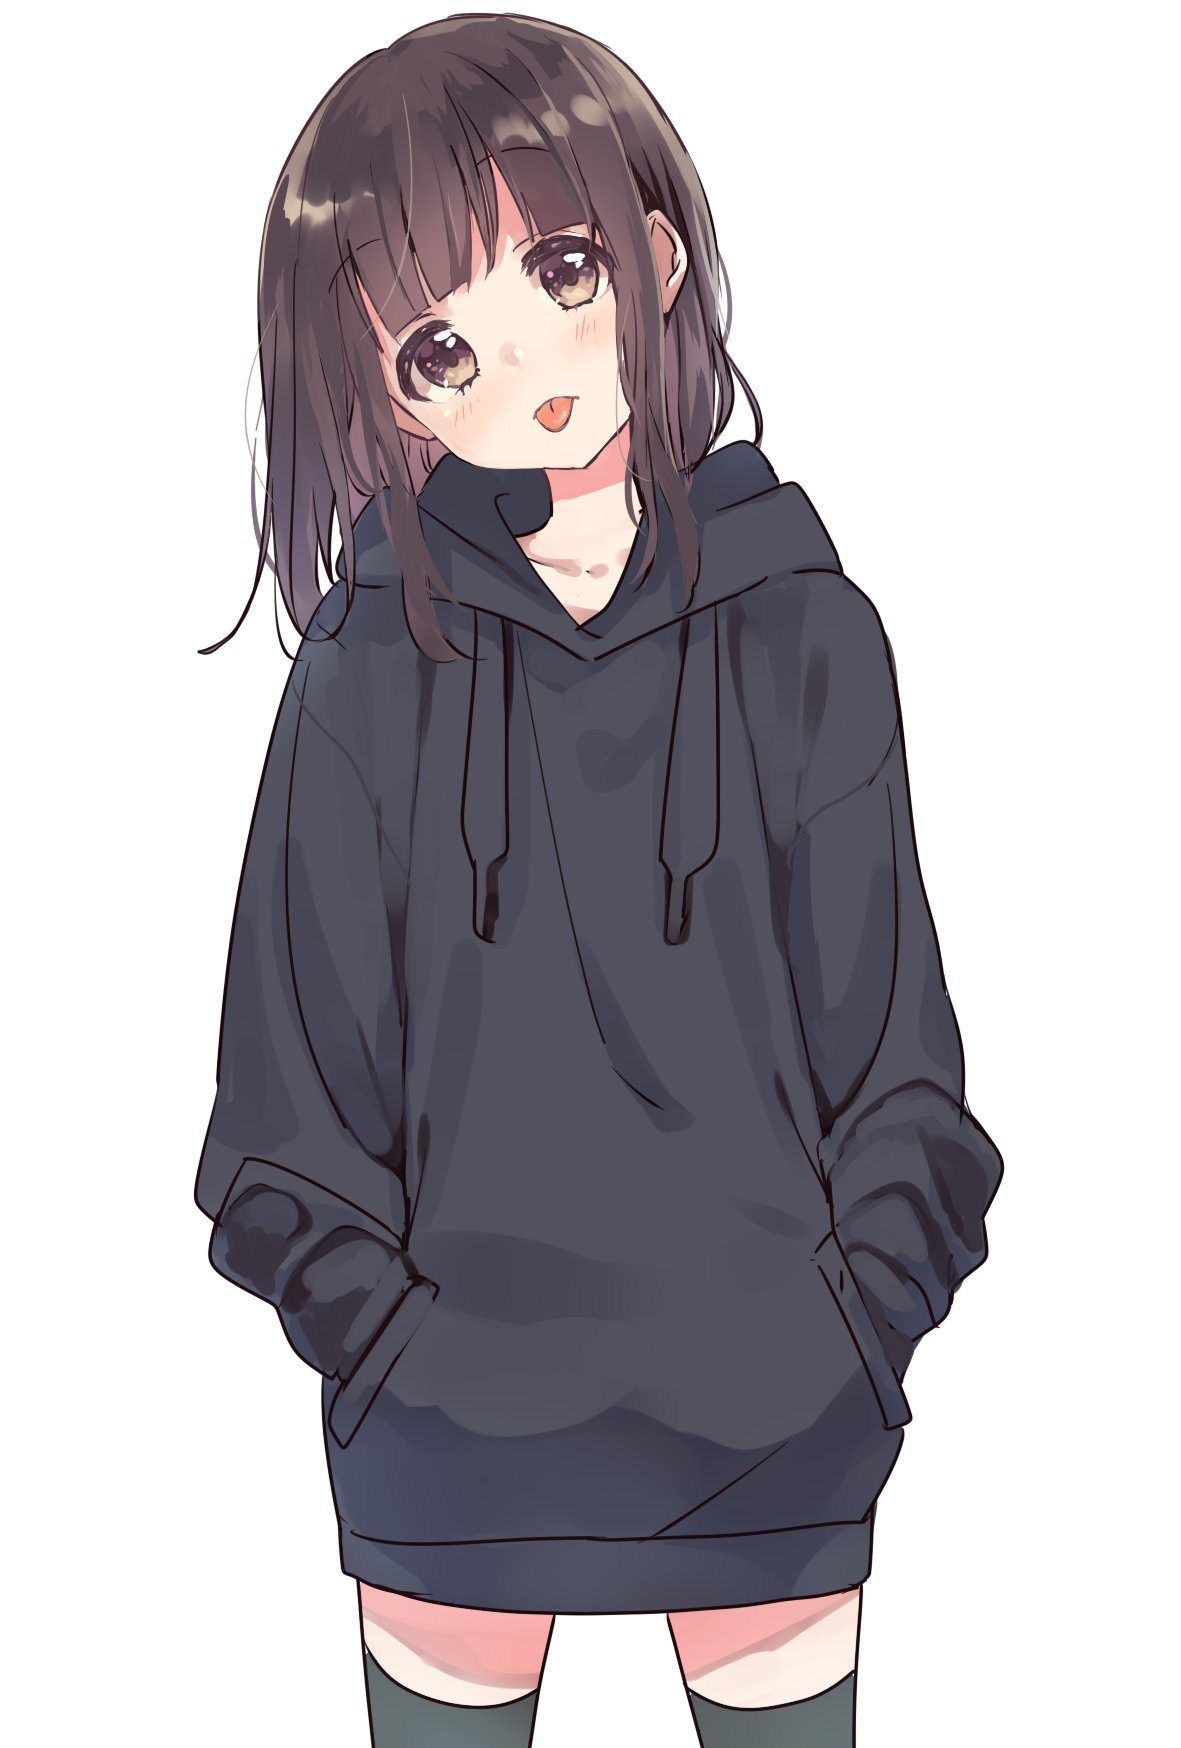 Hoodie Cool Wallpapers For Girls Anime 